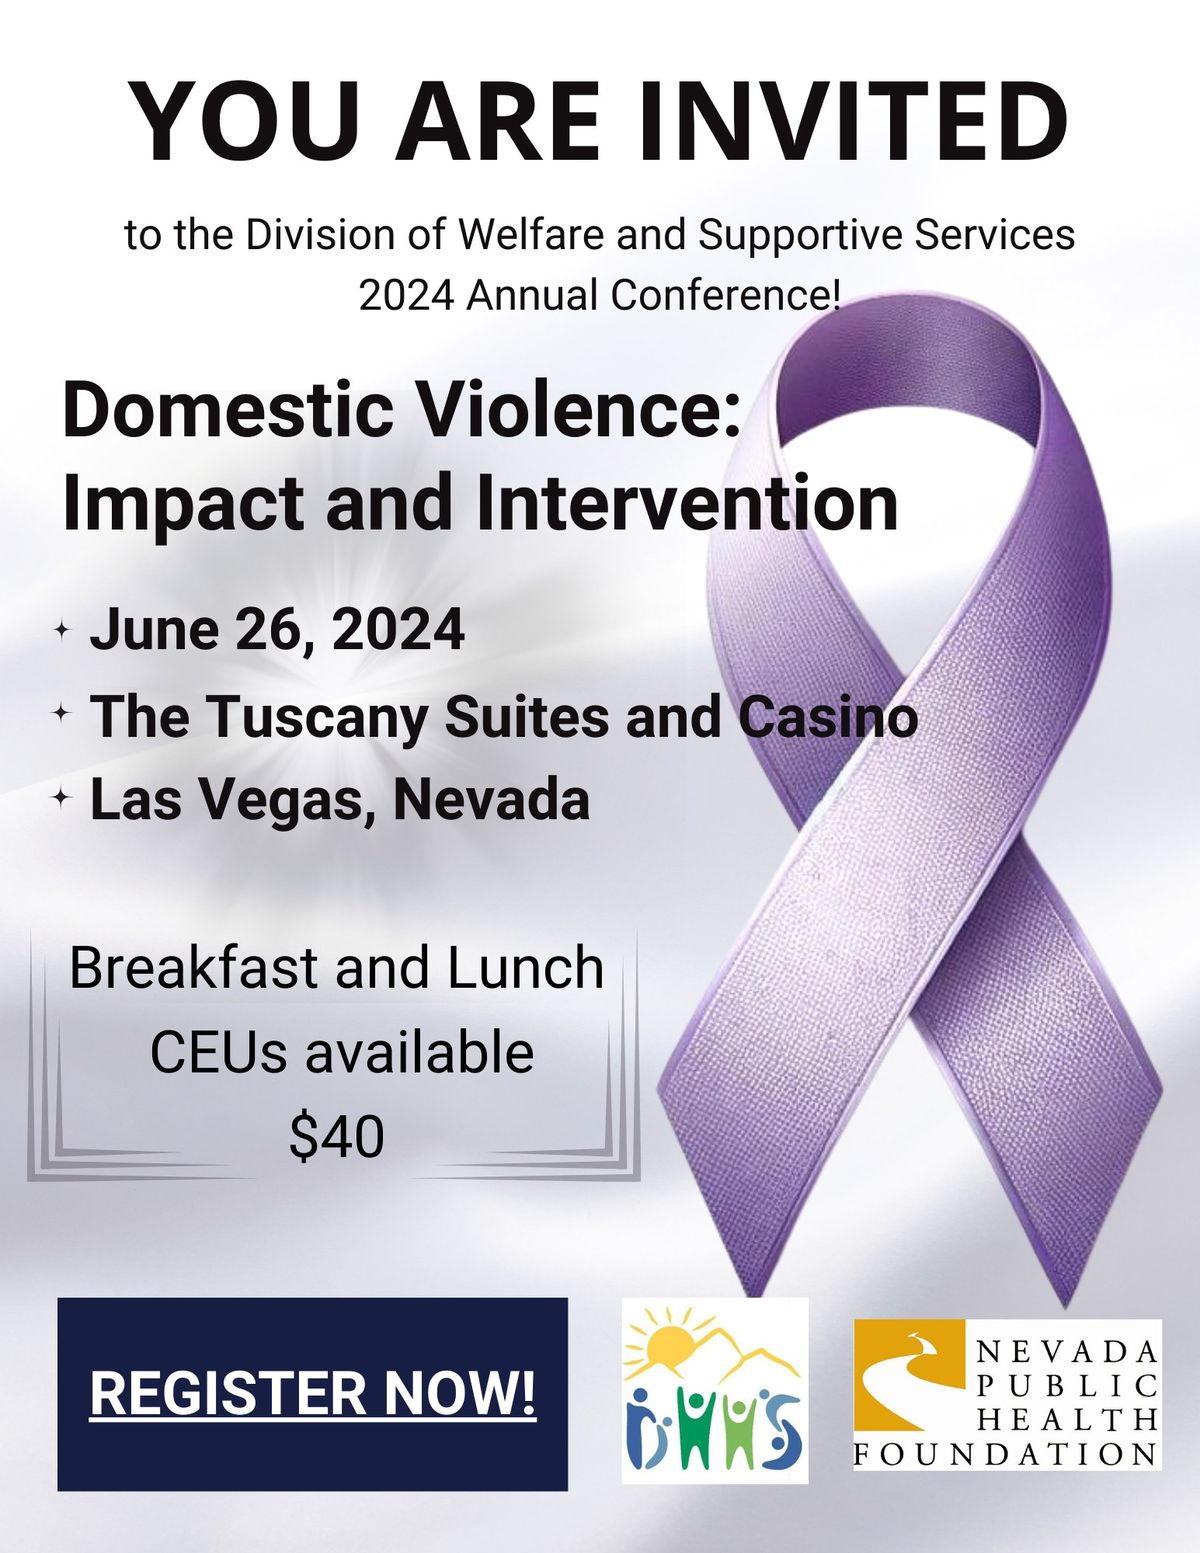 Domestic Violence: Impact and Intervention